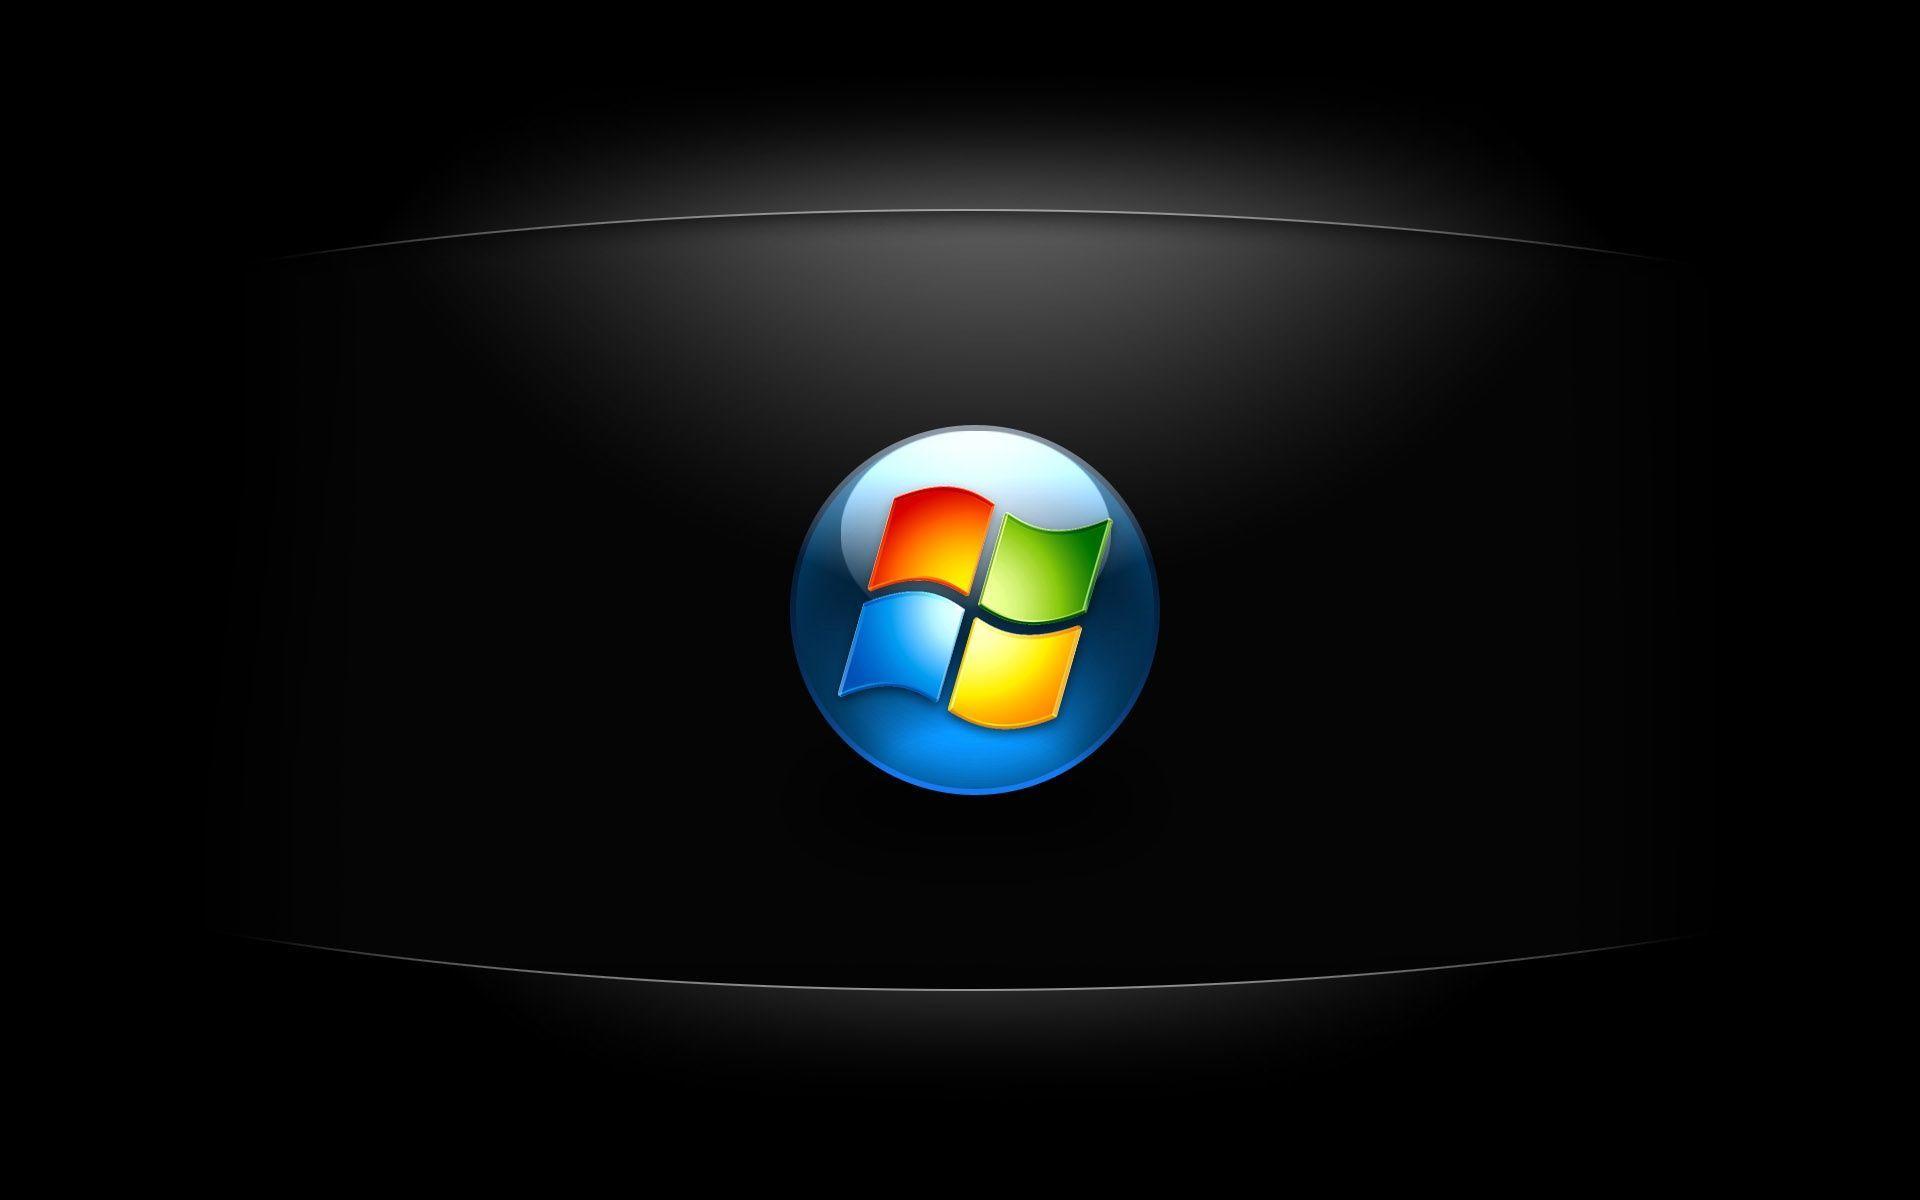 Windows 7 Backgrounds Is Black - Wallpaper Cave